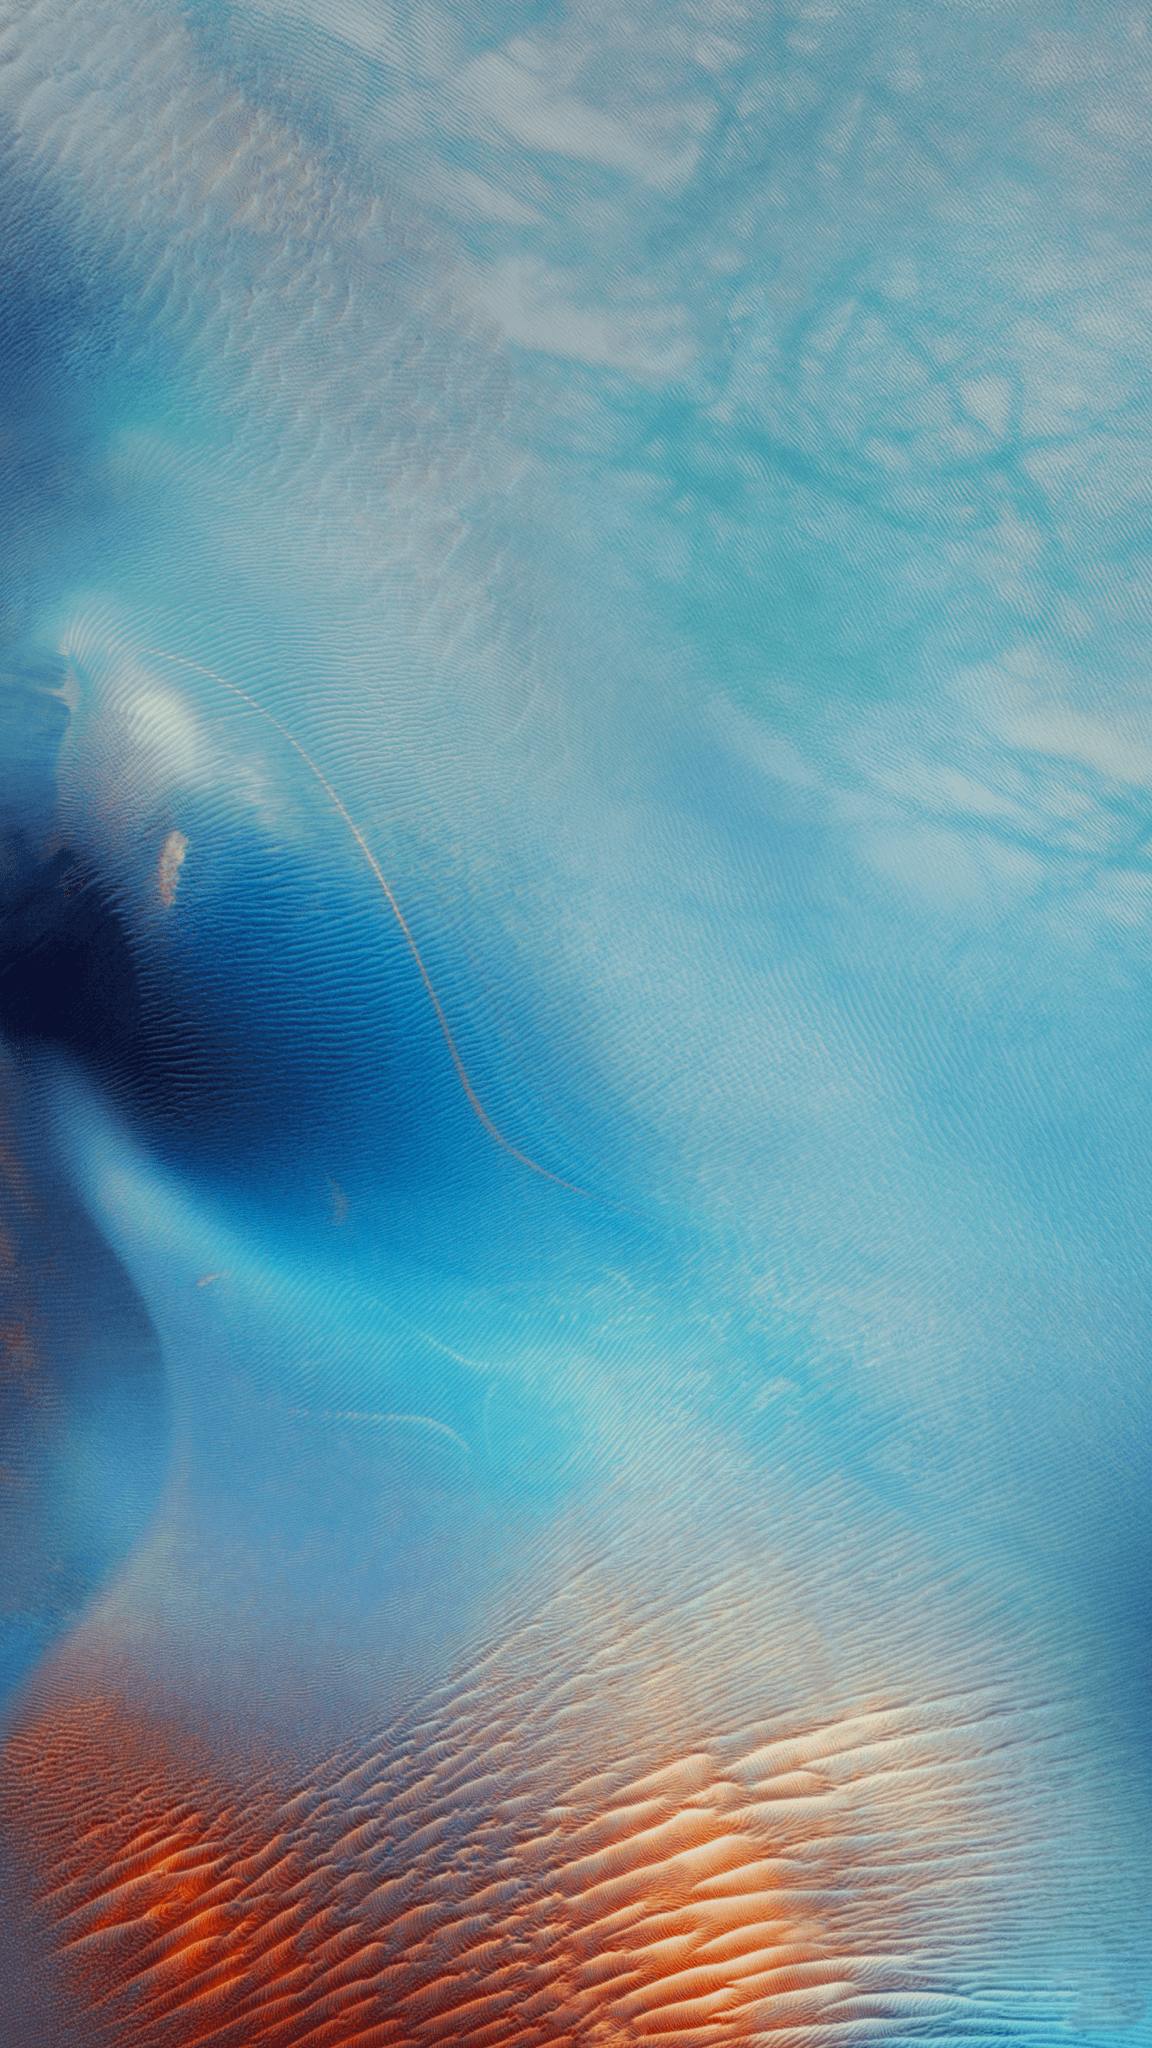 Download Now: The iOS 9 Wallpaper